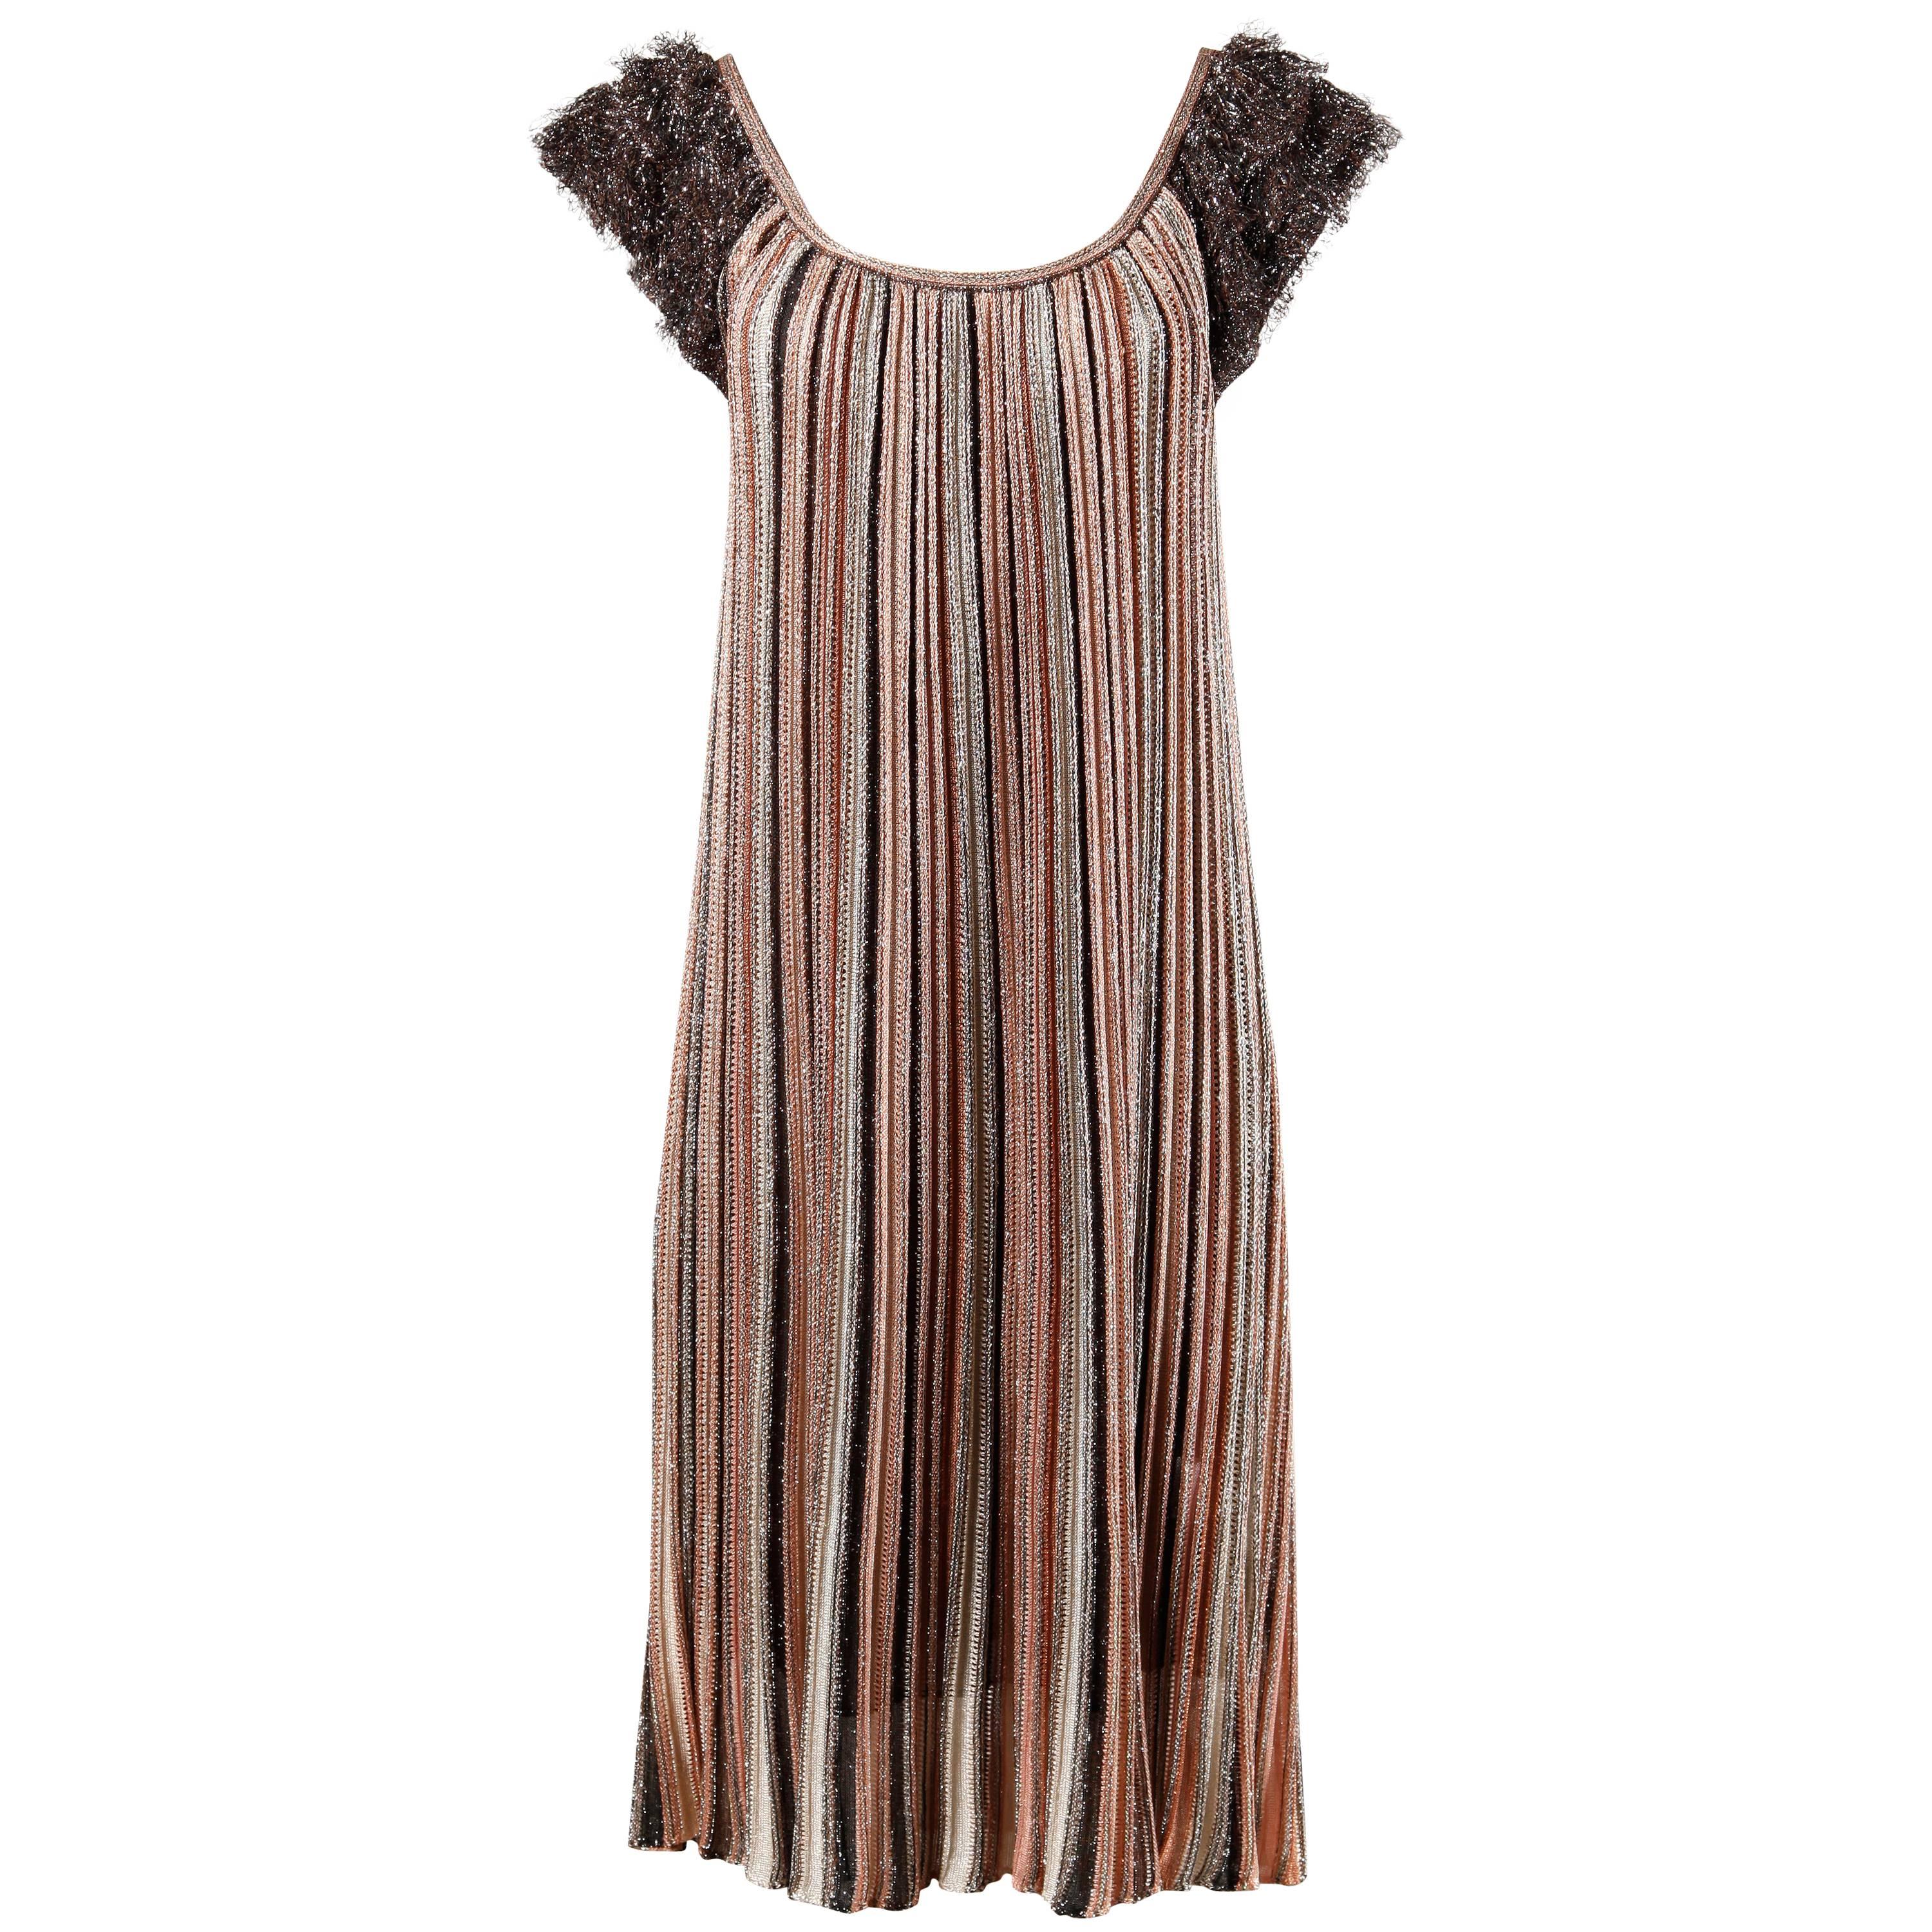 Missoni Metallic Striped Knit Trapeze Dress with Shaggy Fringe Cap Sleeves